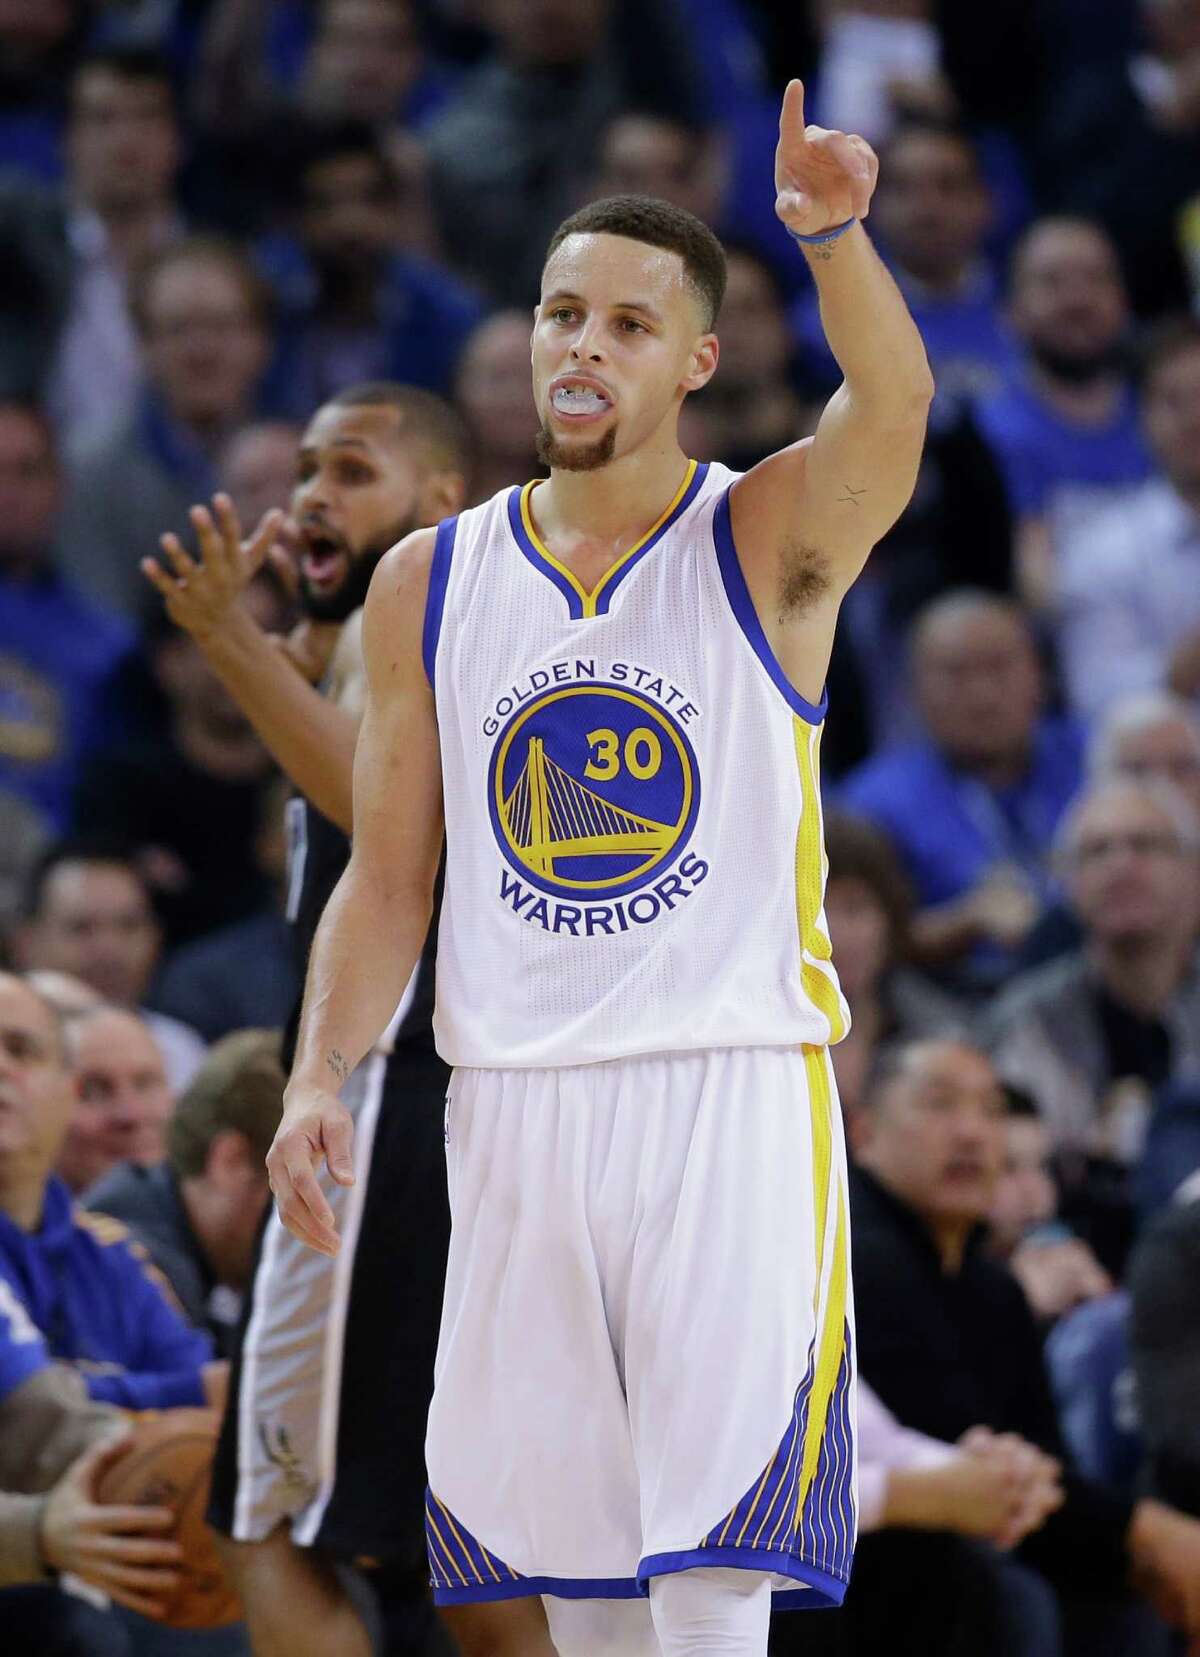 Golden State Warriors’ Stephen Curry celebrates a basket against the San Antonio Spurs on Jan. 25, 2016, in Oakland, Calif.